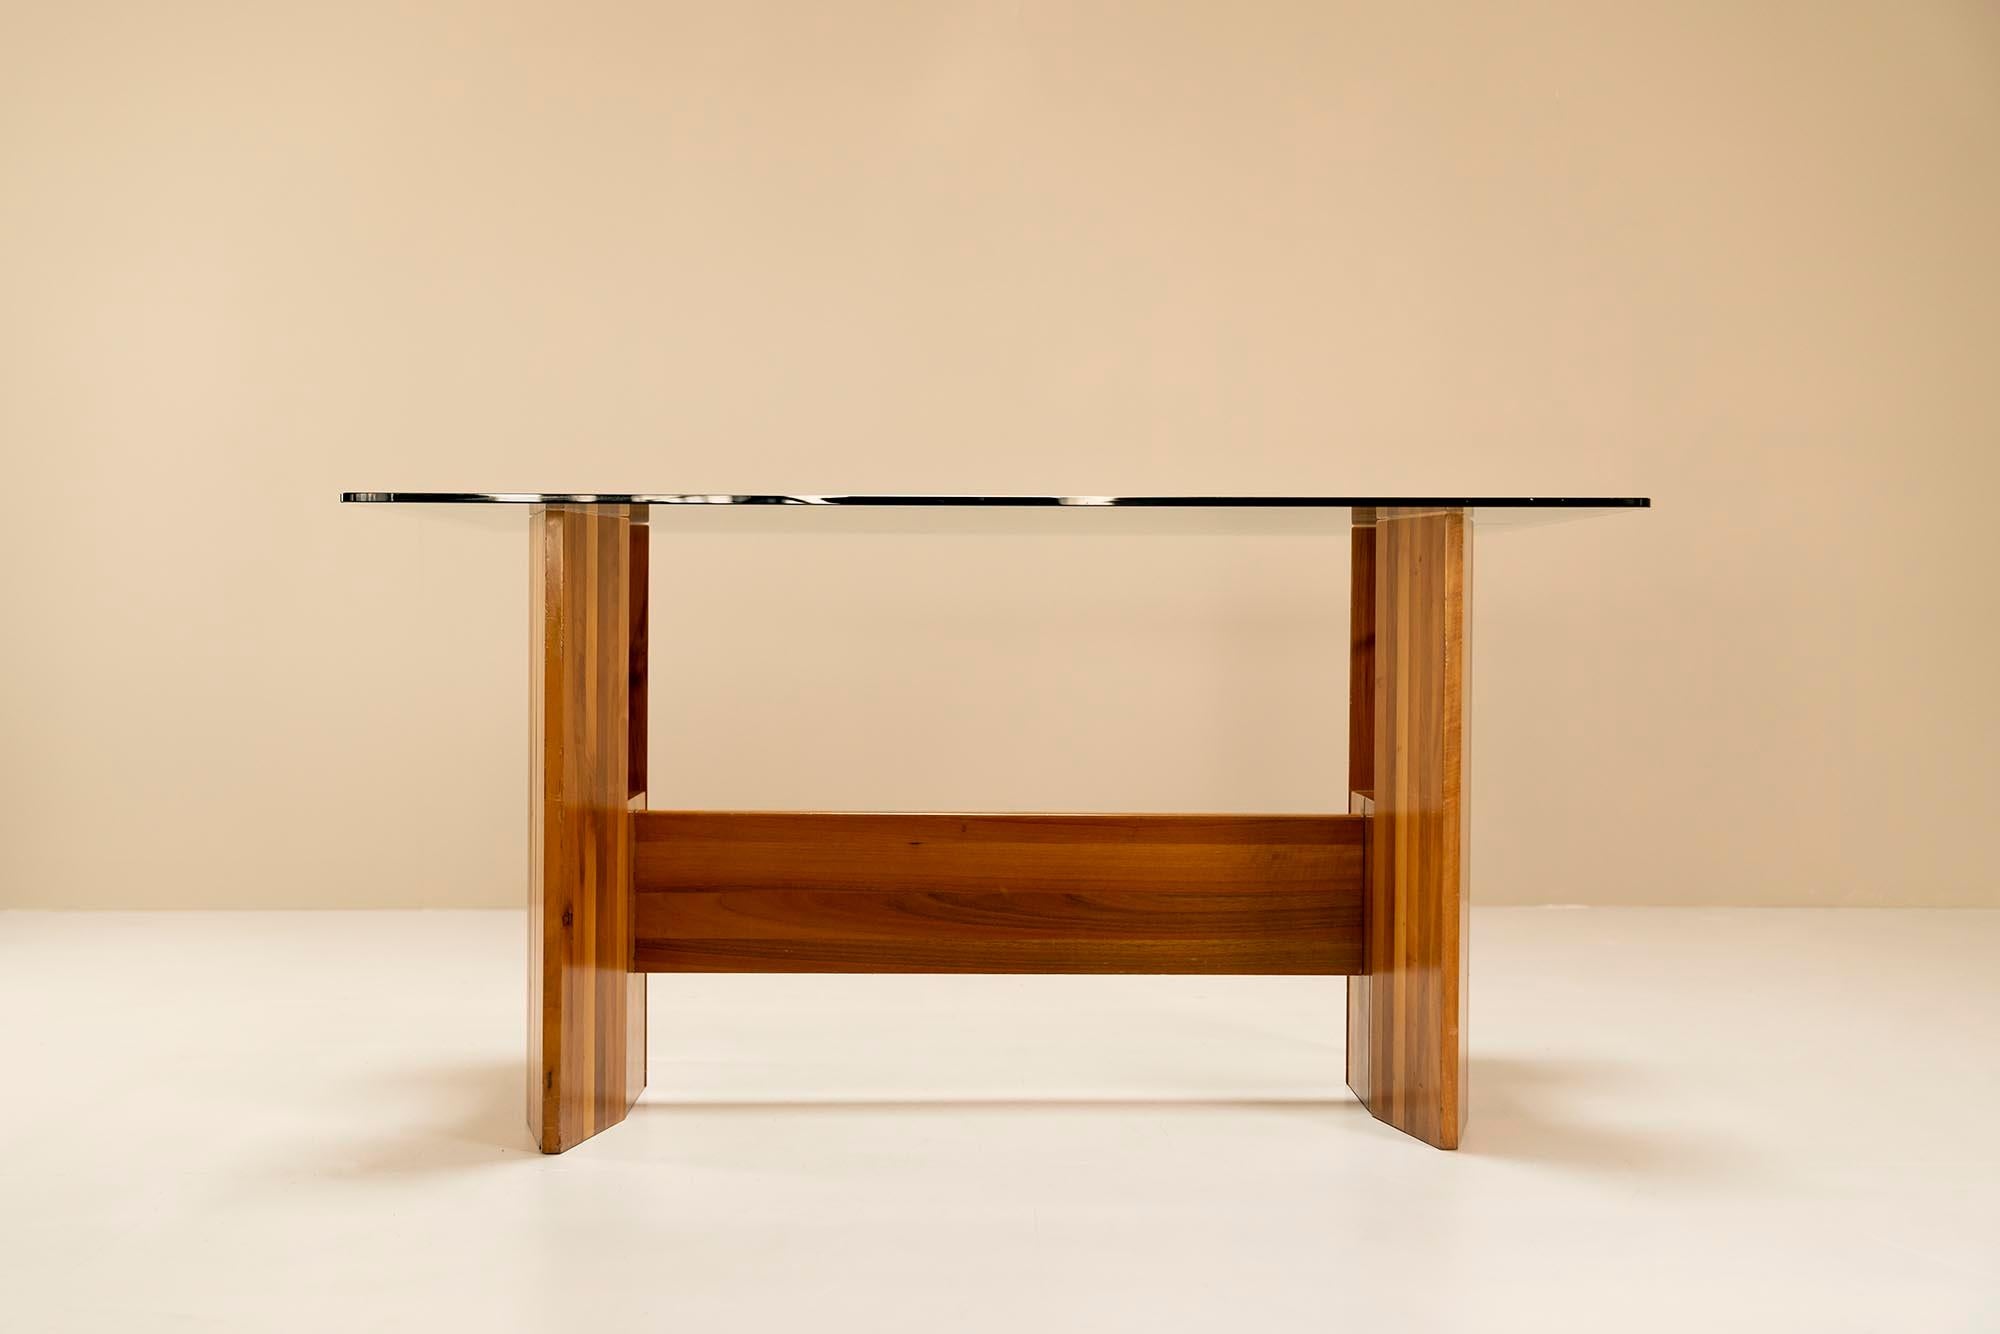 A beautiful Italian (console) table that can also serve as a desk due to its size. The two large hexagonal legs consist of walnut slats that are tightly attached to each other. From the center of the leg there is a see-through. Just below the glass